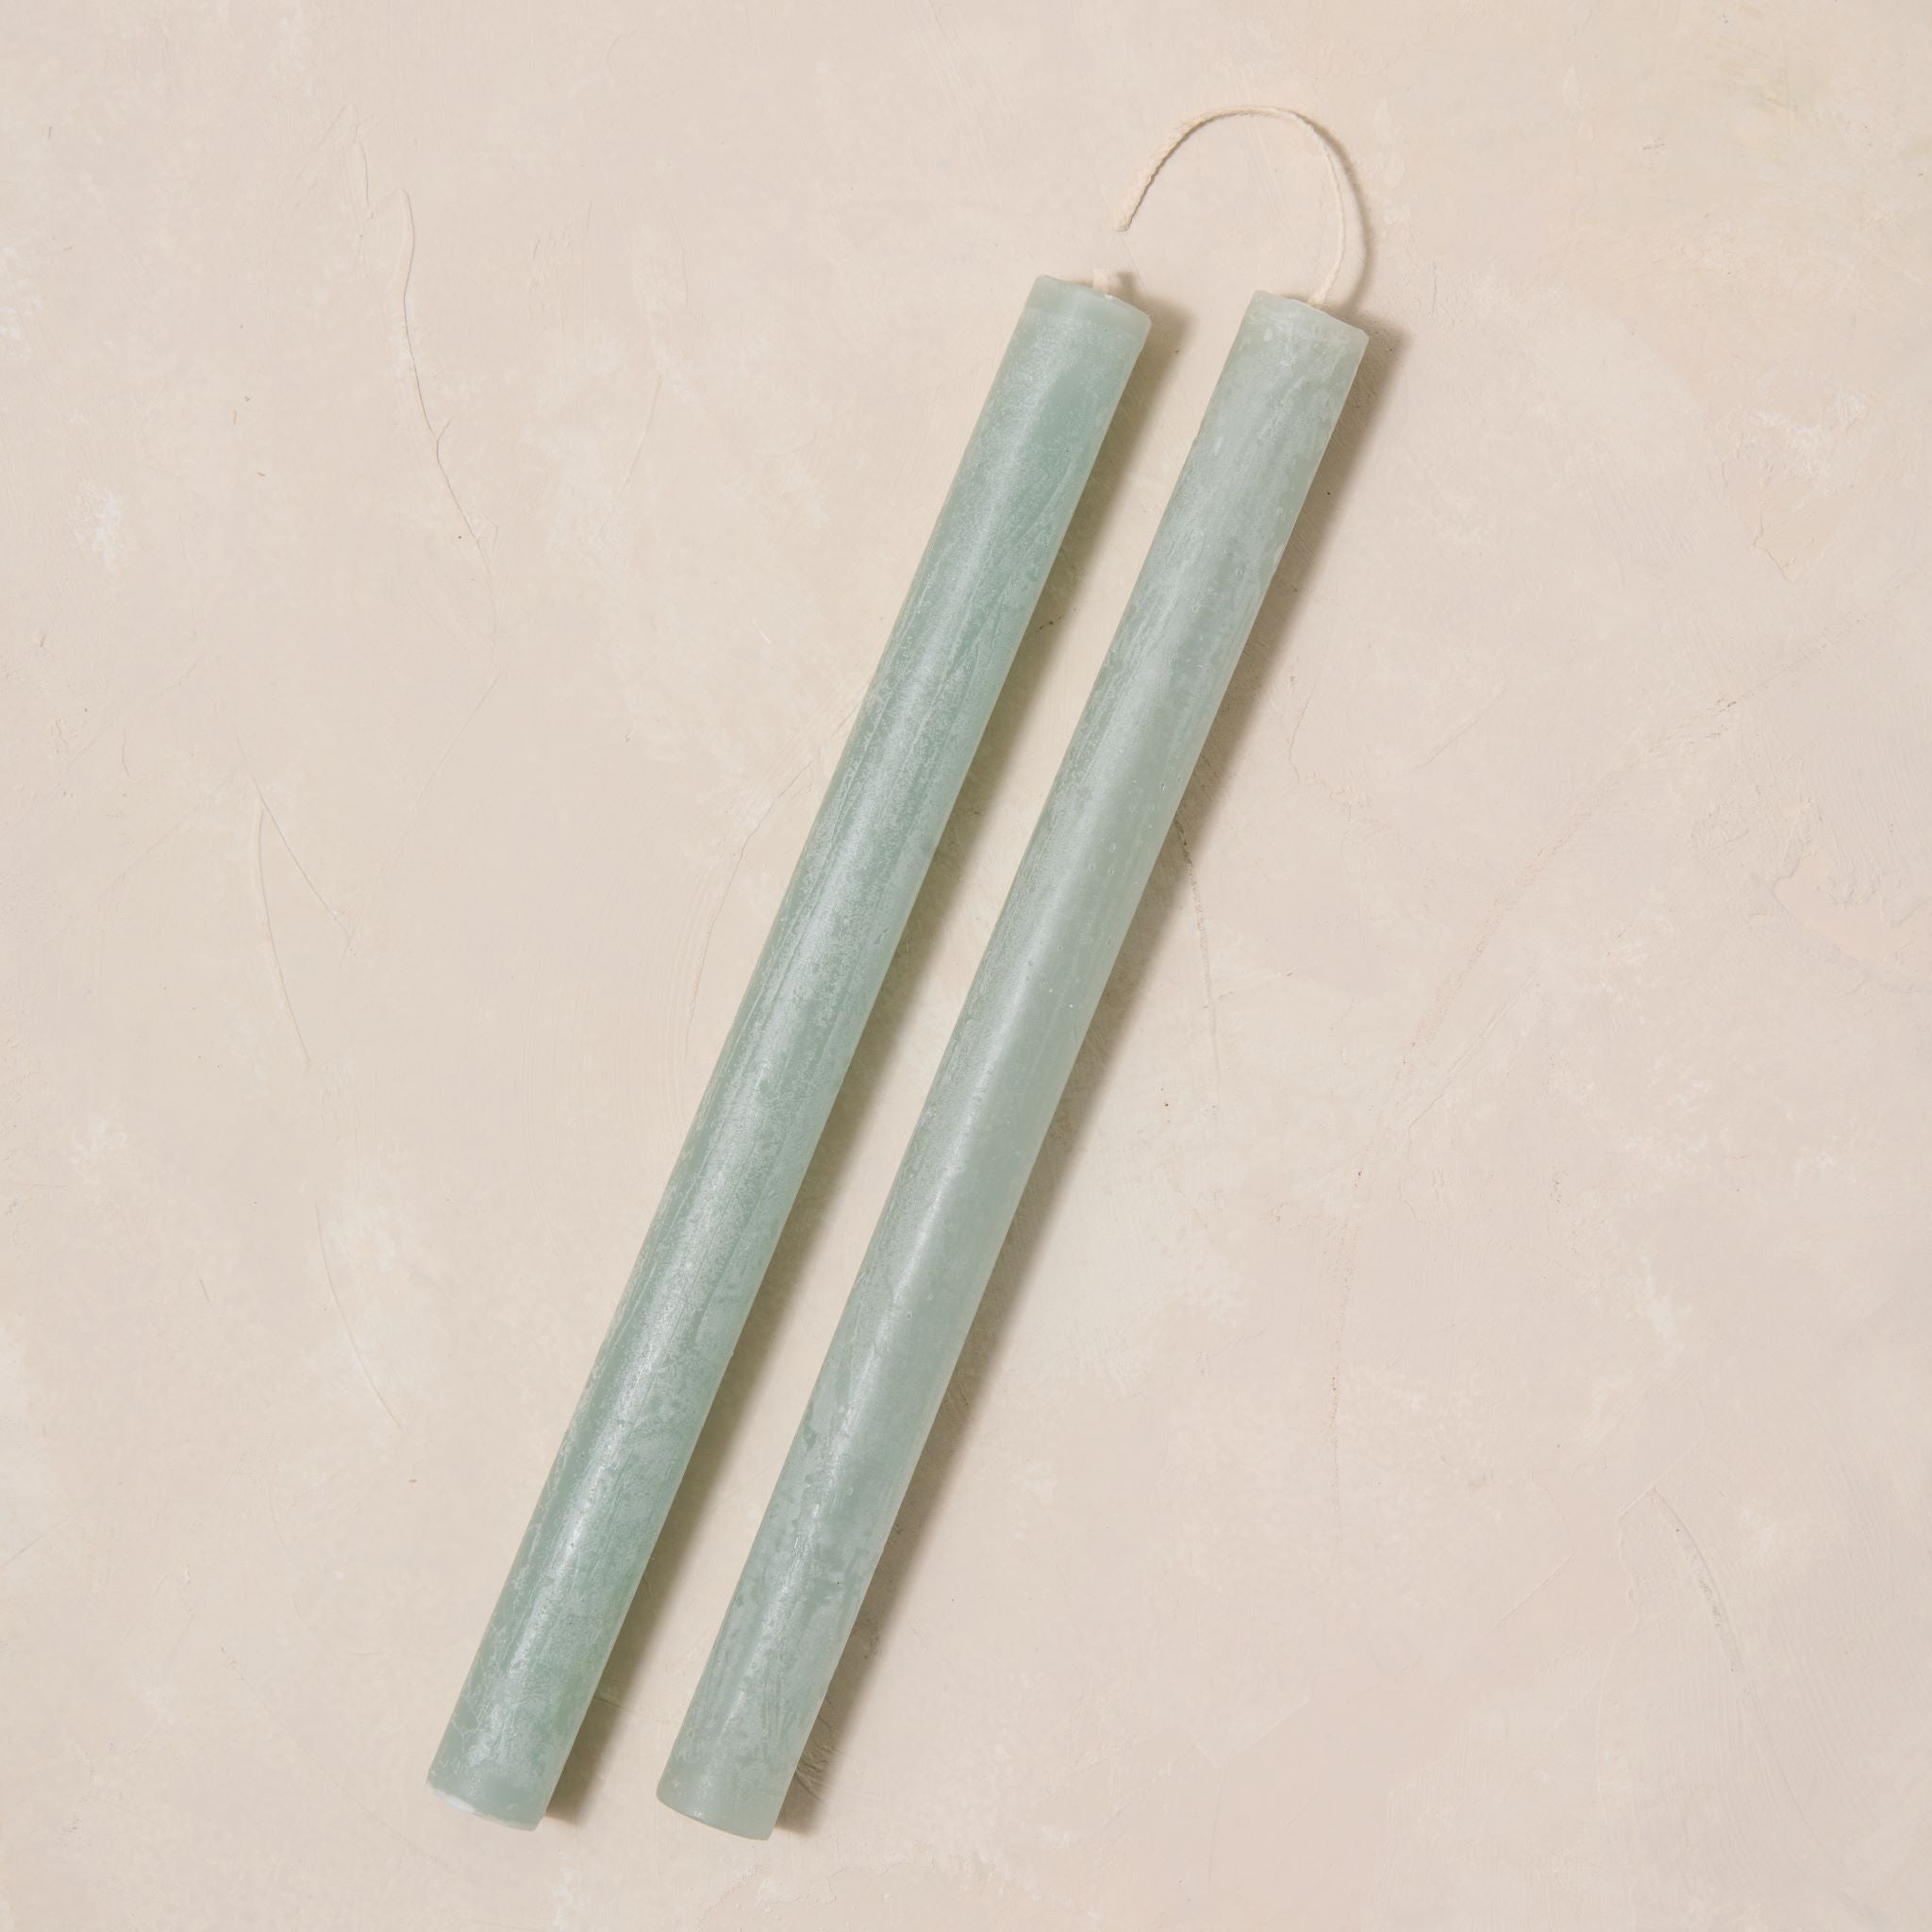 Dark Blue Timber Taper Hanging Pair On sale for $6.00, discounted from $8.00